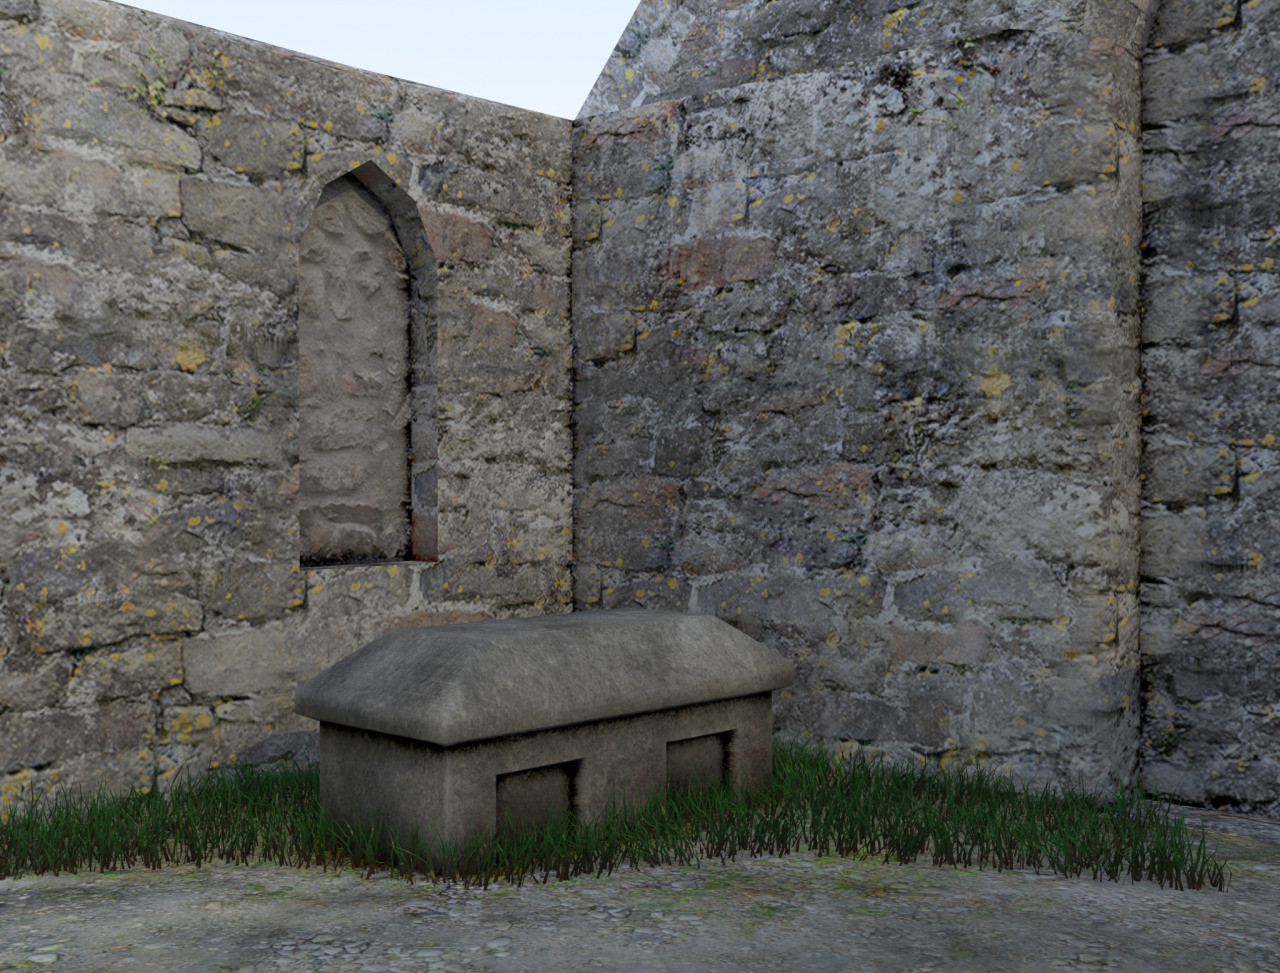 I did a quick test to see what this would look like fully rendered in Modo with some actual 3d grass.